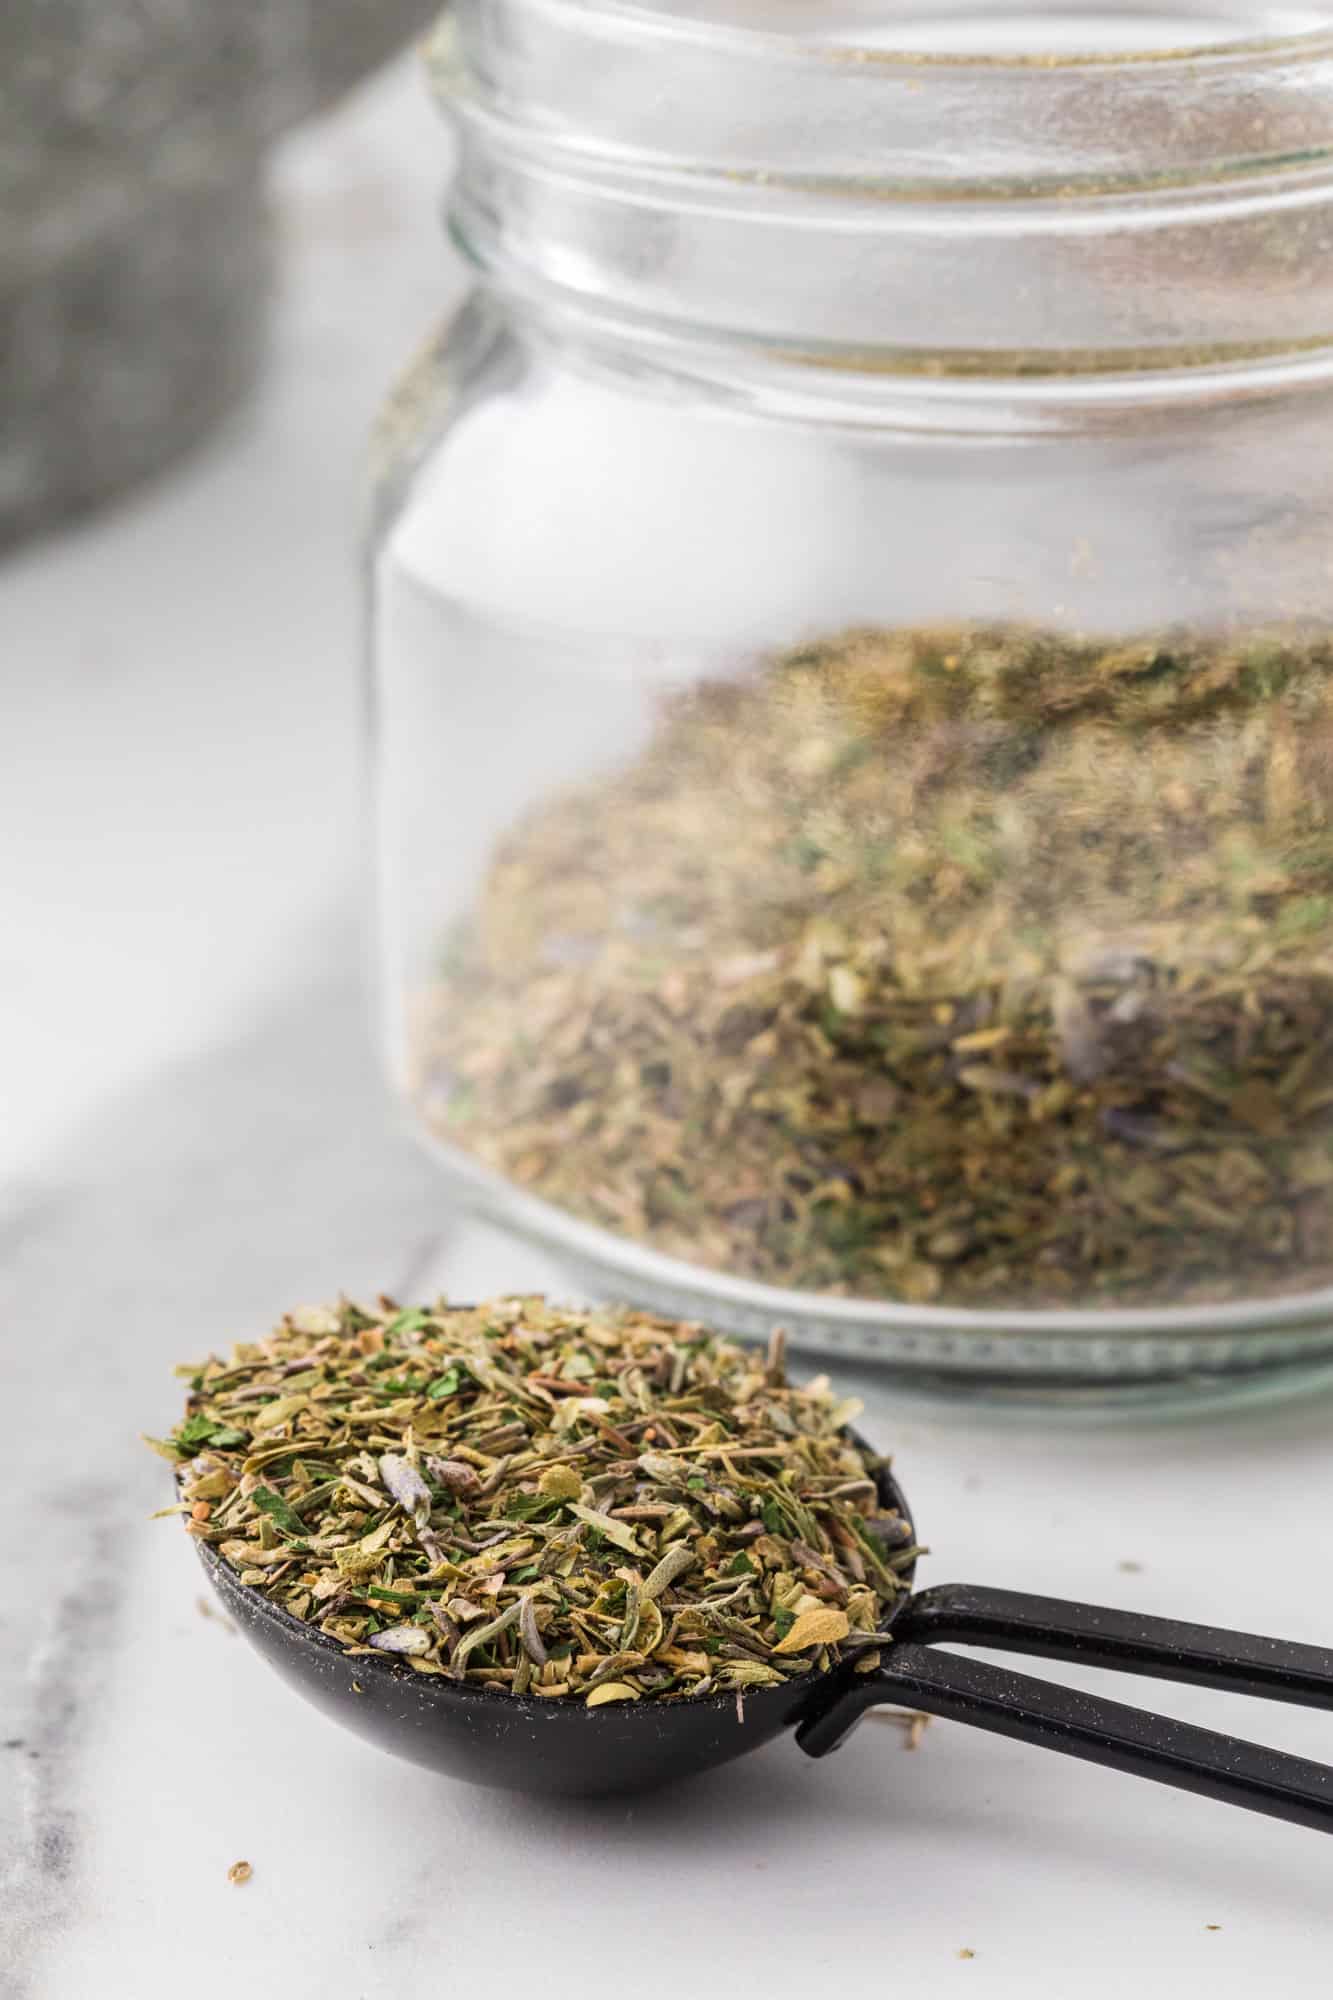 Herb mixture on a small spoon, jar in background.